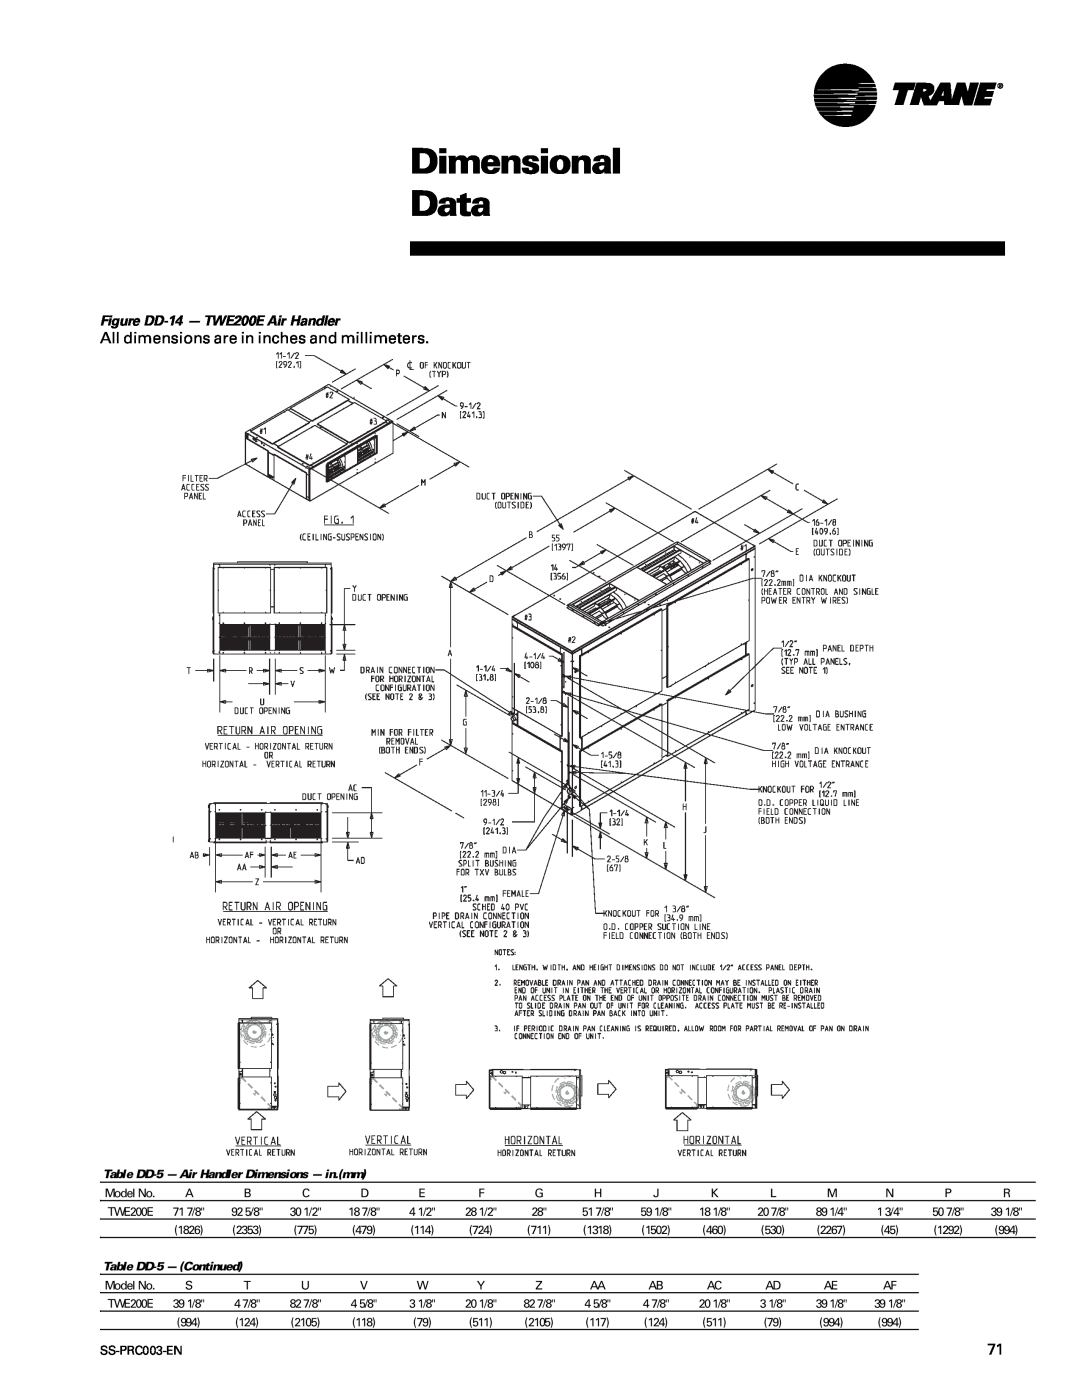 Trane SS-PRC003-EN manual Dimensional Data, All dimensions are in inches and millimeters, Figure DD-14- TWE200E Air Handler 